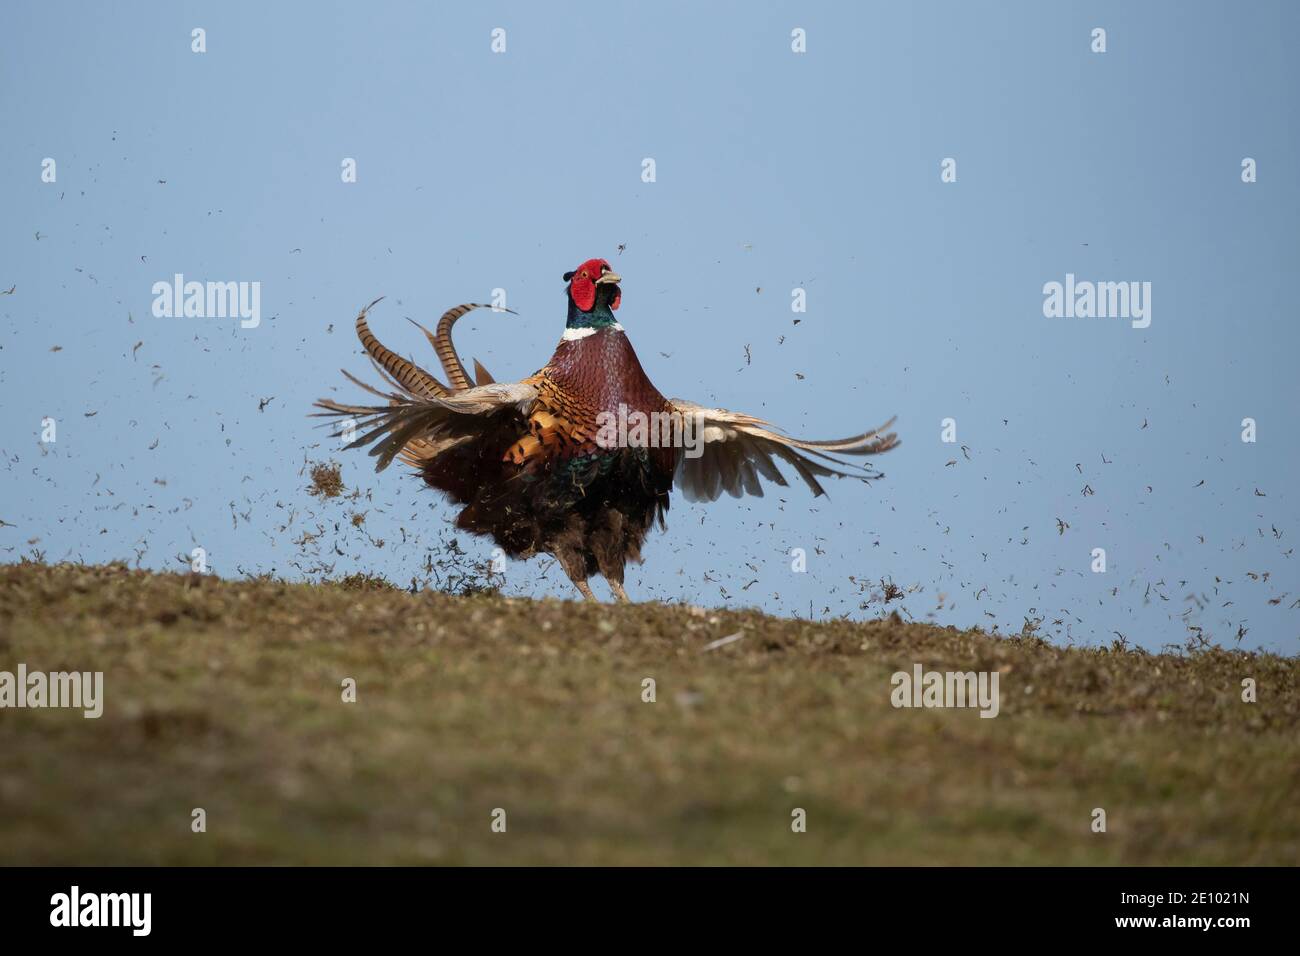 Common pheasant (Phasianus colchicus) adult male bird during it's courtship display, Suffolk, England, United Kingdom, Europe Stock Photo